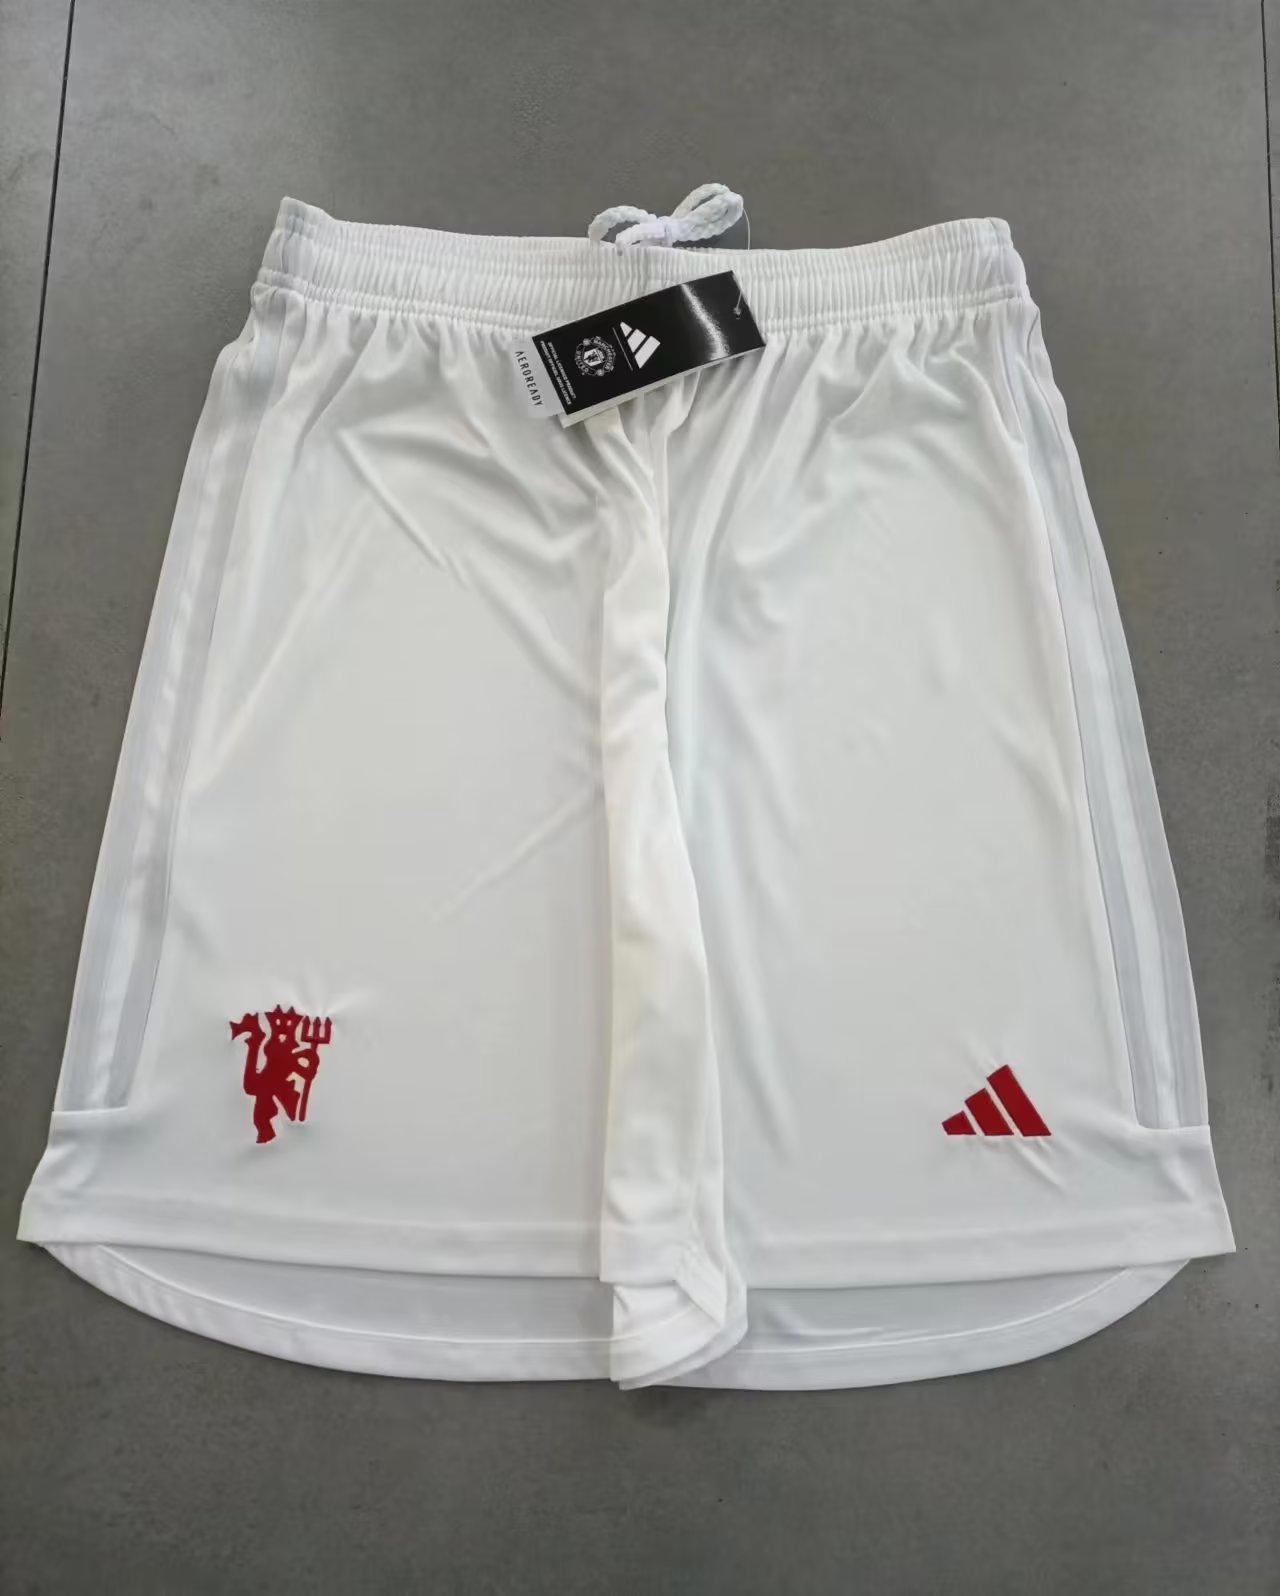 2023/2024 Manchester United 3rd away  shorts